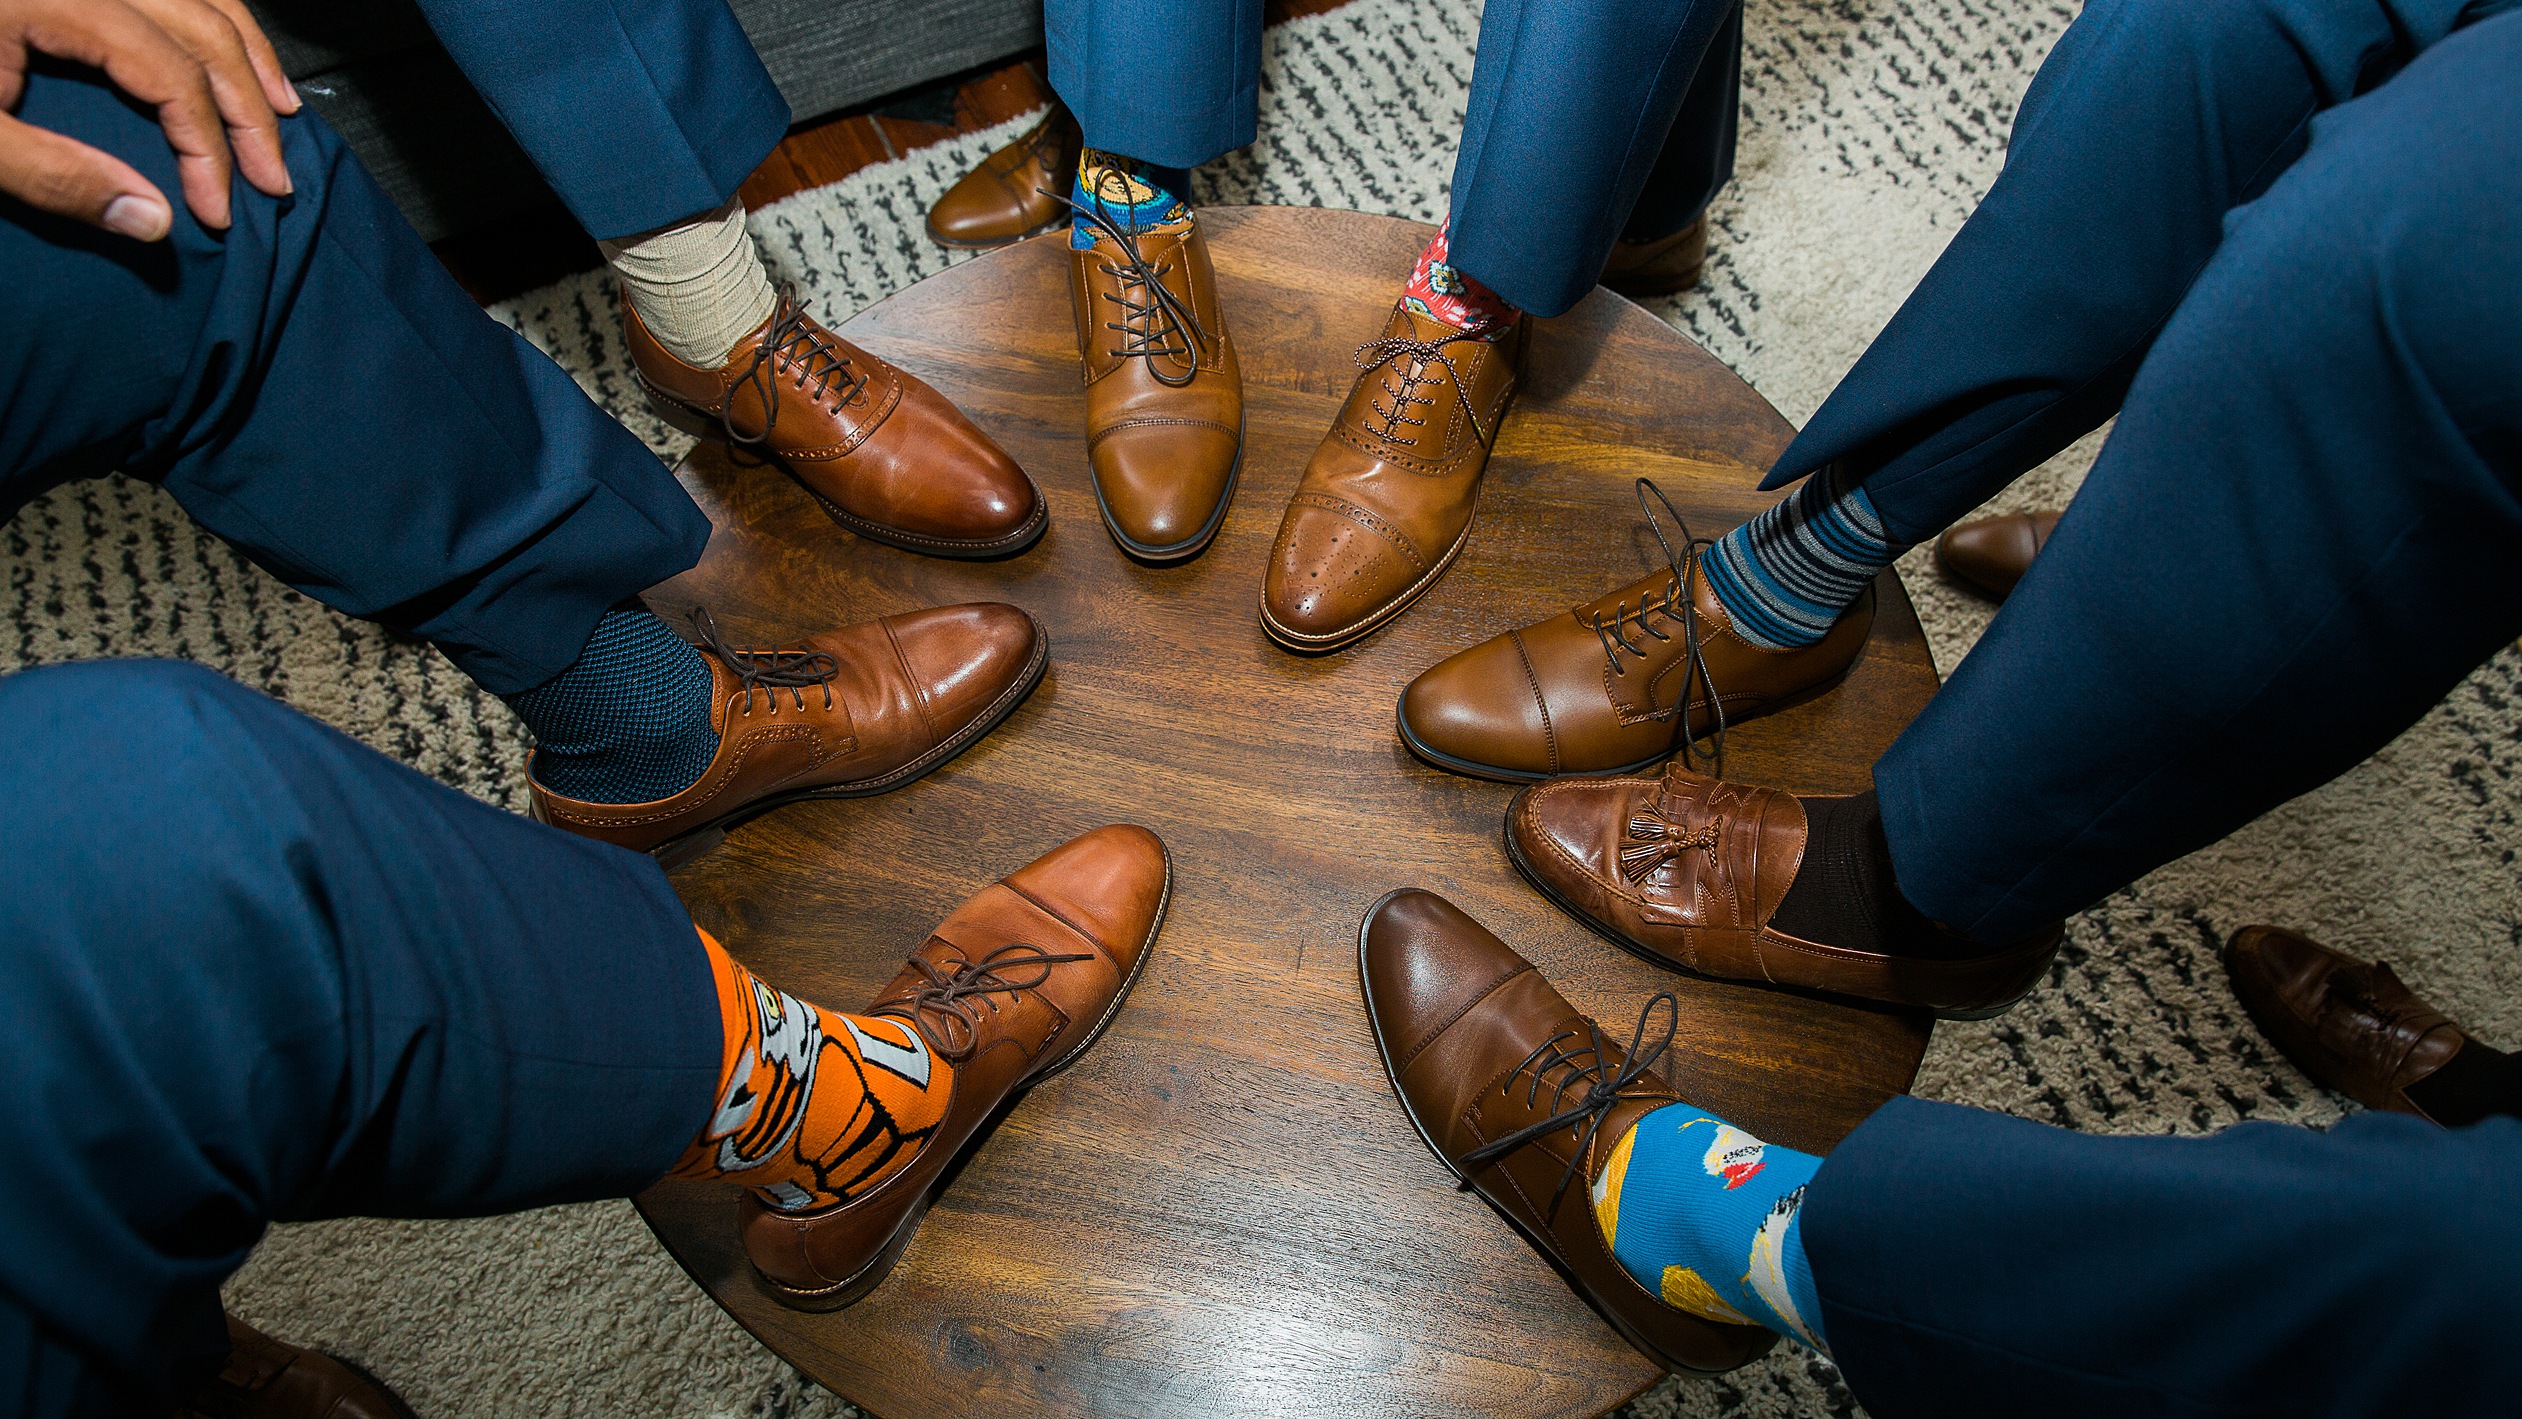 Grooms shoe shot with crazy socks